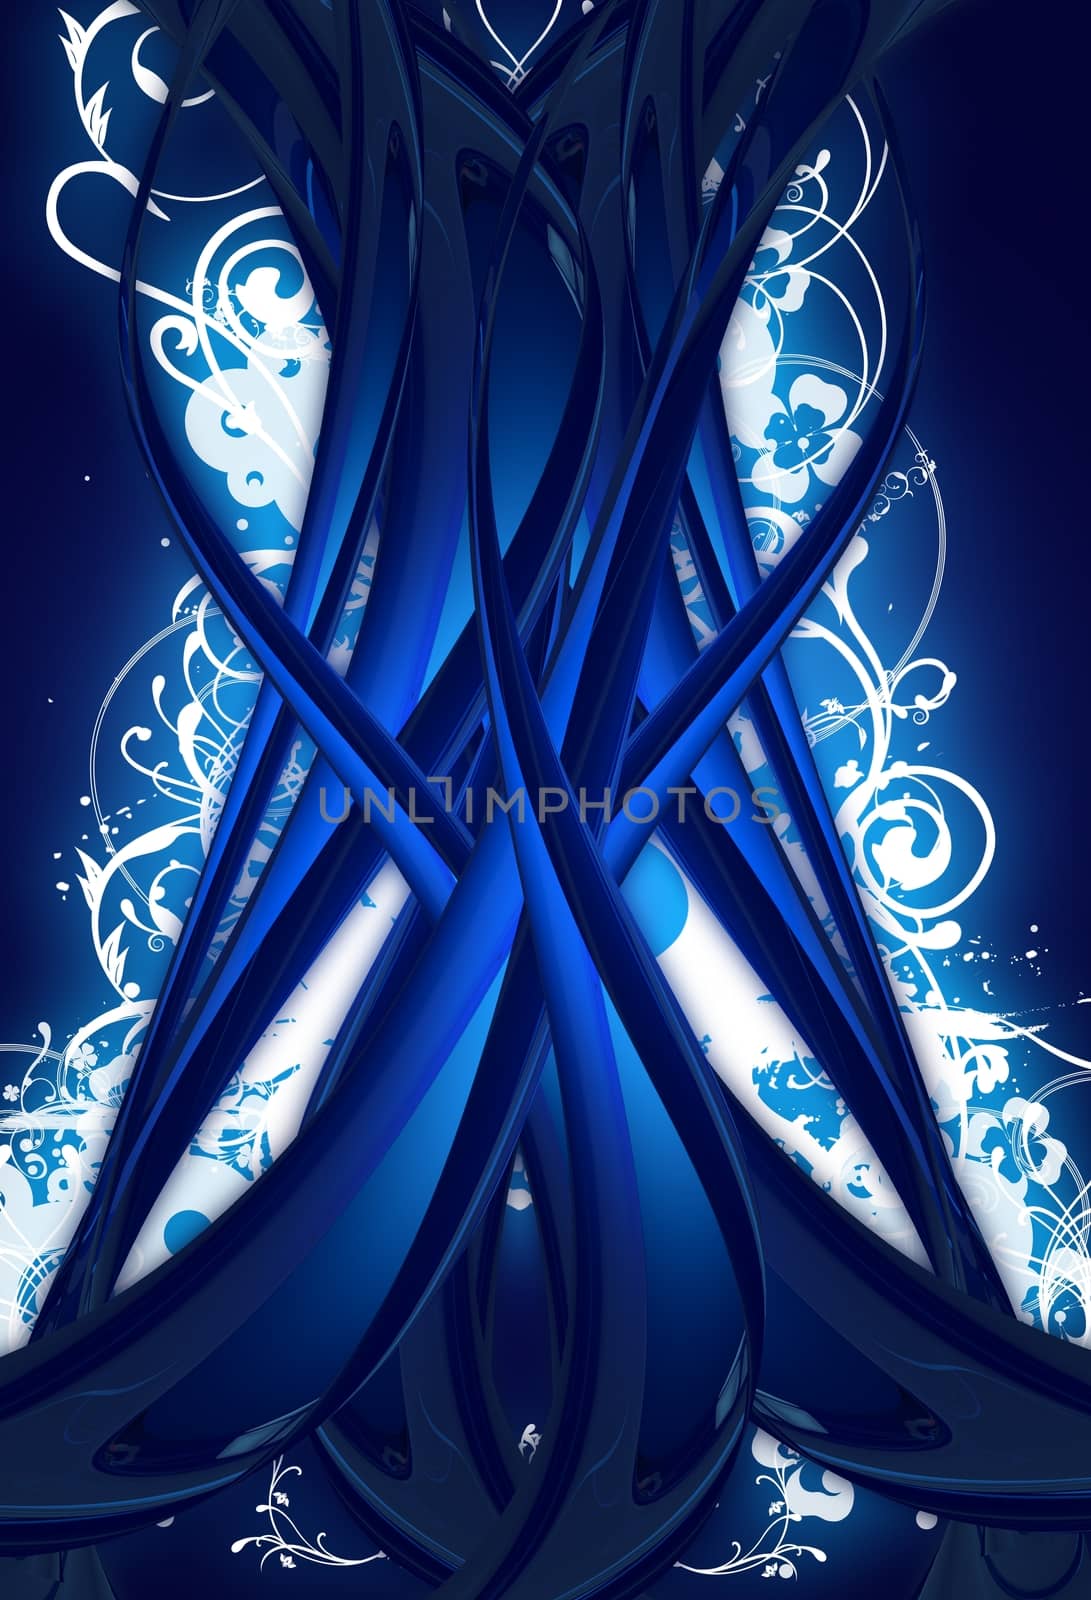 Blue Digital Tree Concept Abstract Illustration. White Floral Ornament in the Background. Cool Vertical Design.